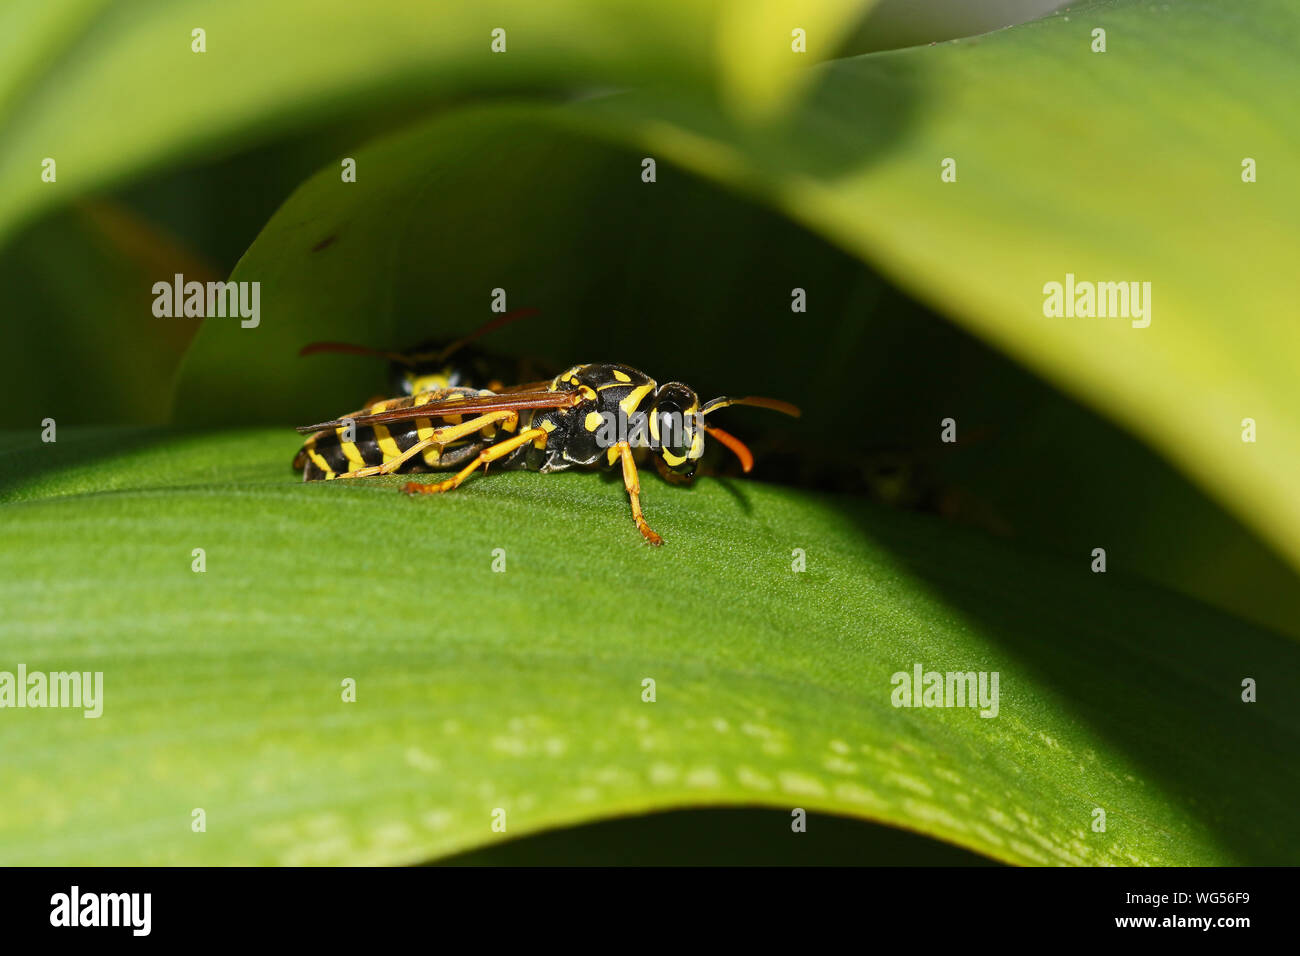 Tree wasp or paper wasp very close up sheltering from the heat Latin polistes dominulus or gallicus like dolichovespula sylvestris on a calla lily Stock Photo